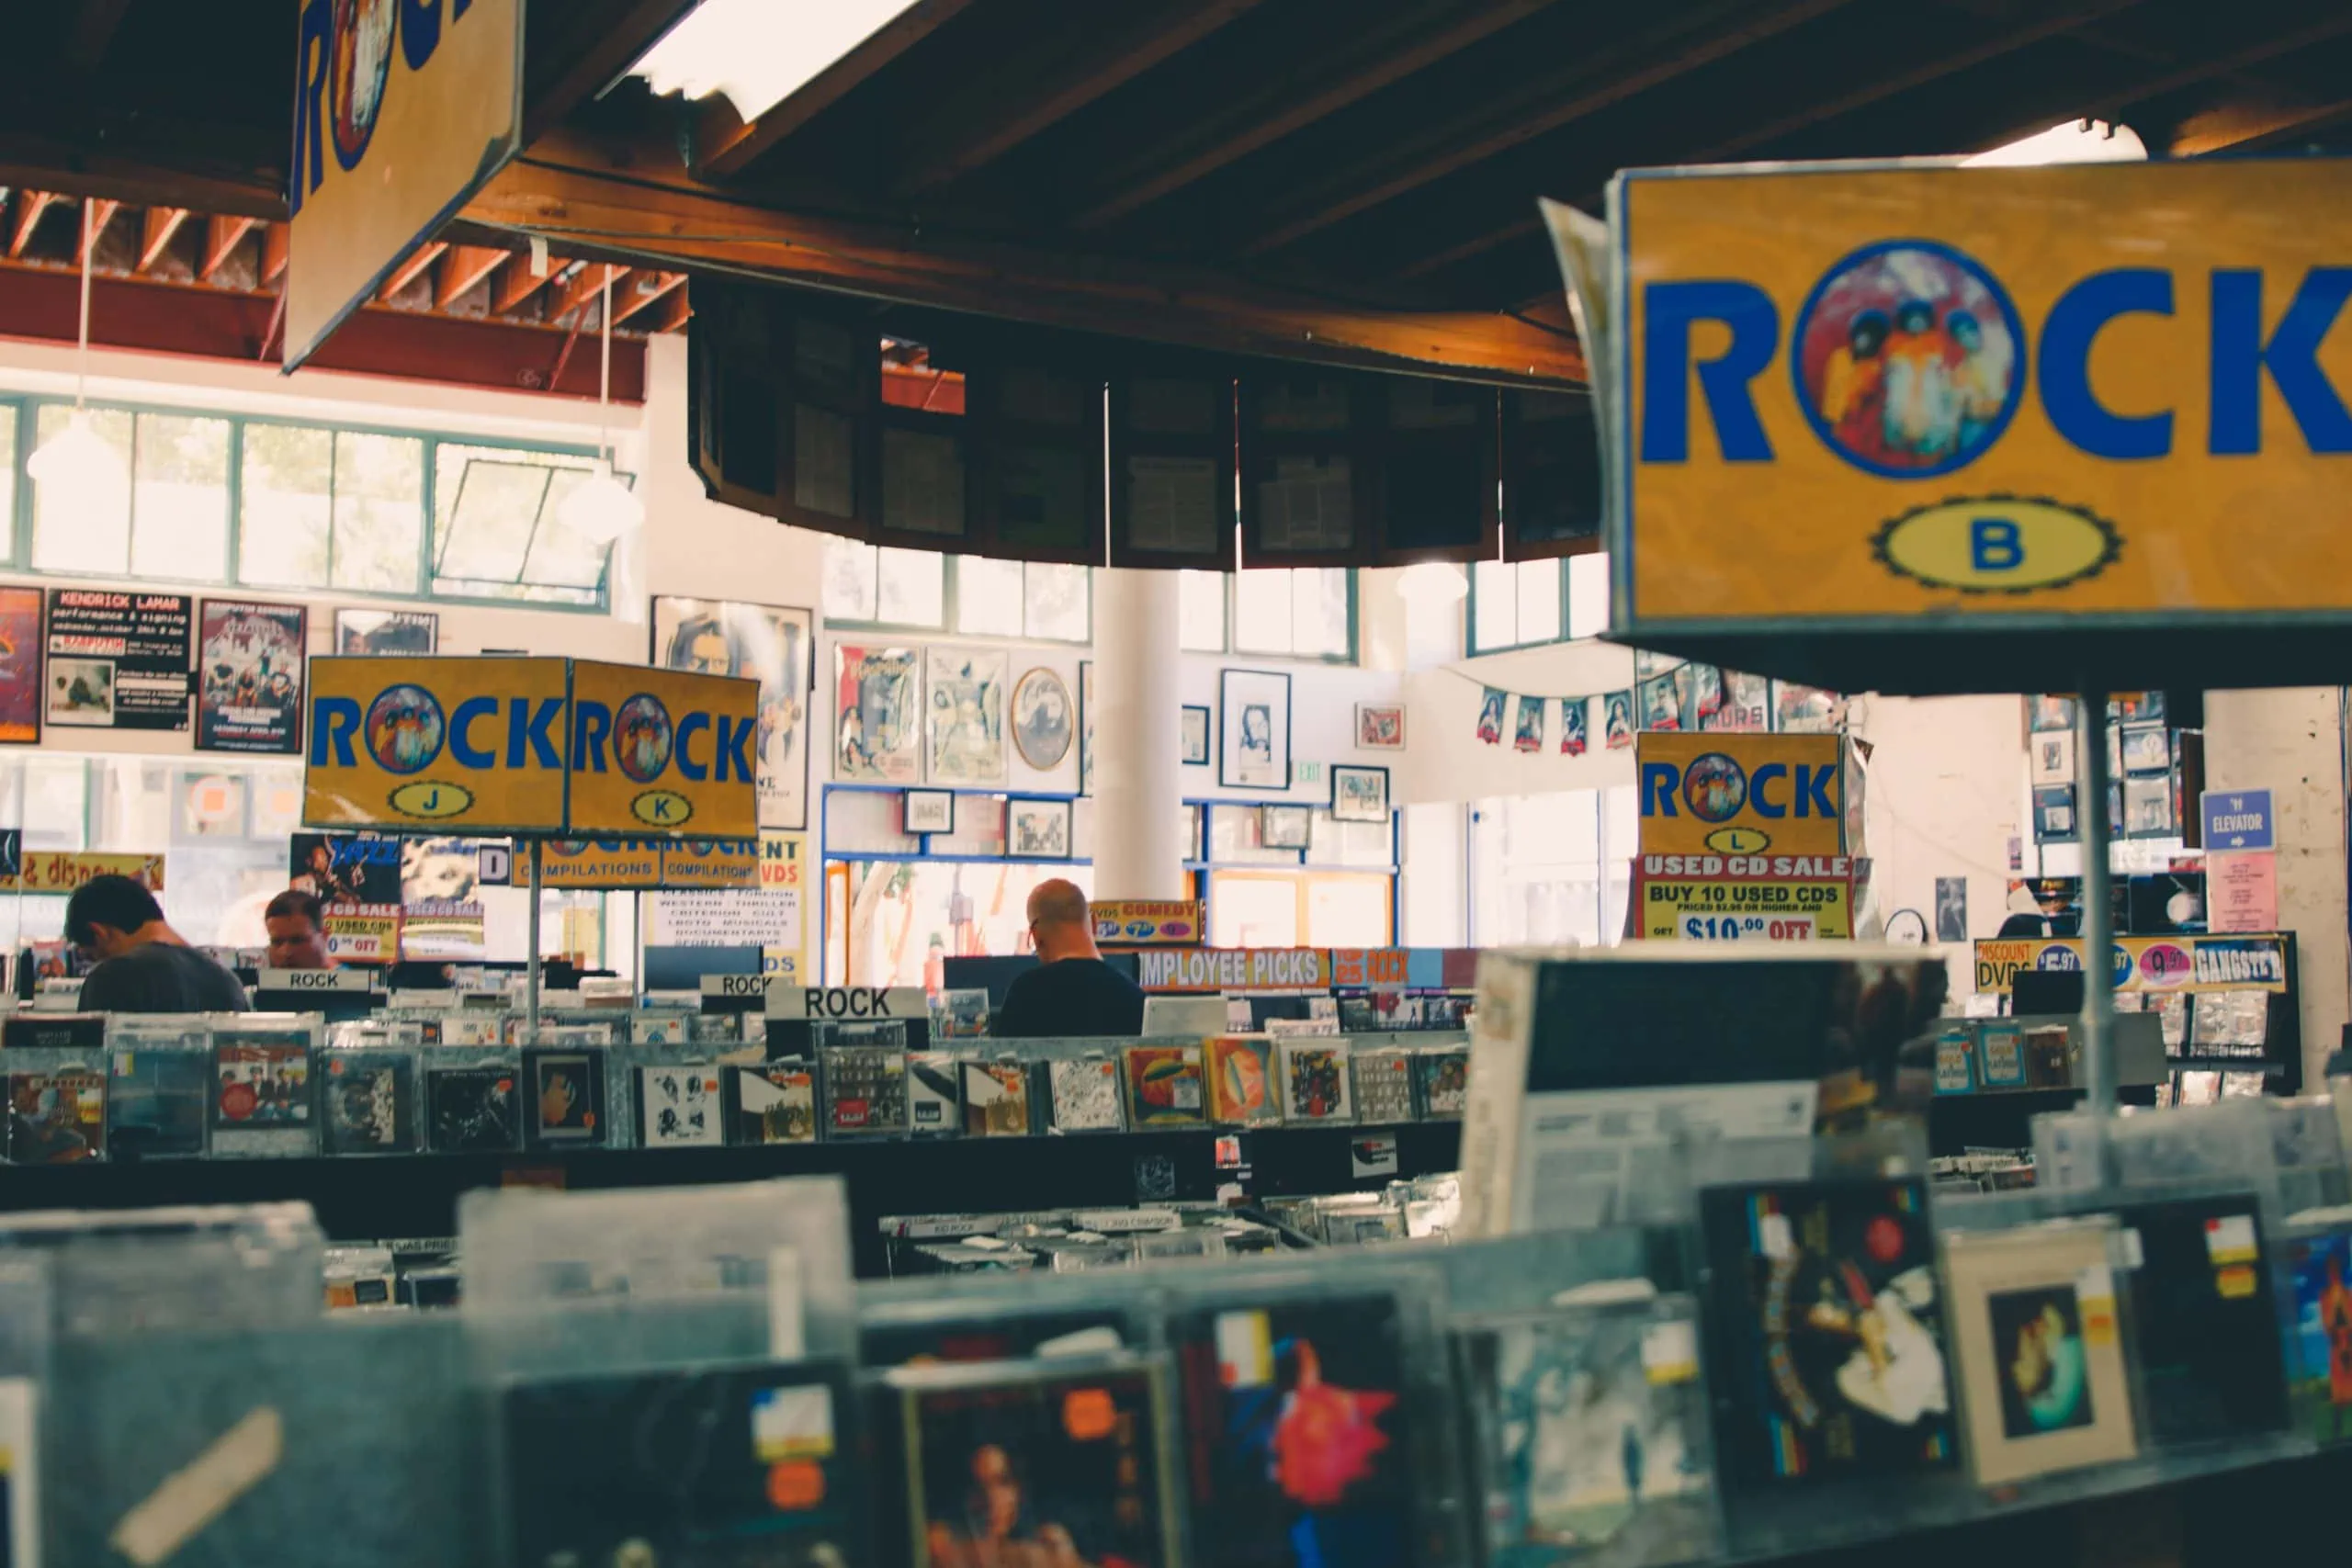 Record shop in San Diego protected by security camera system